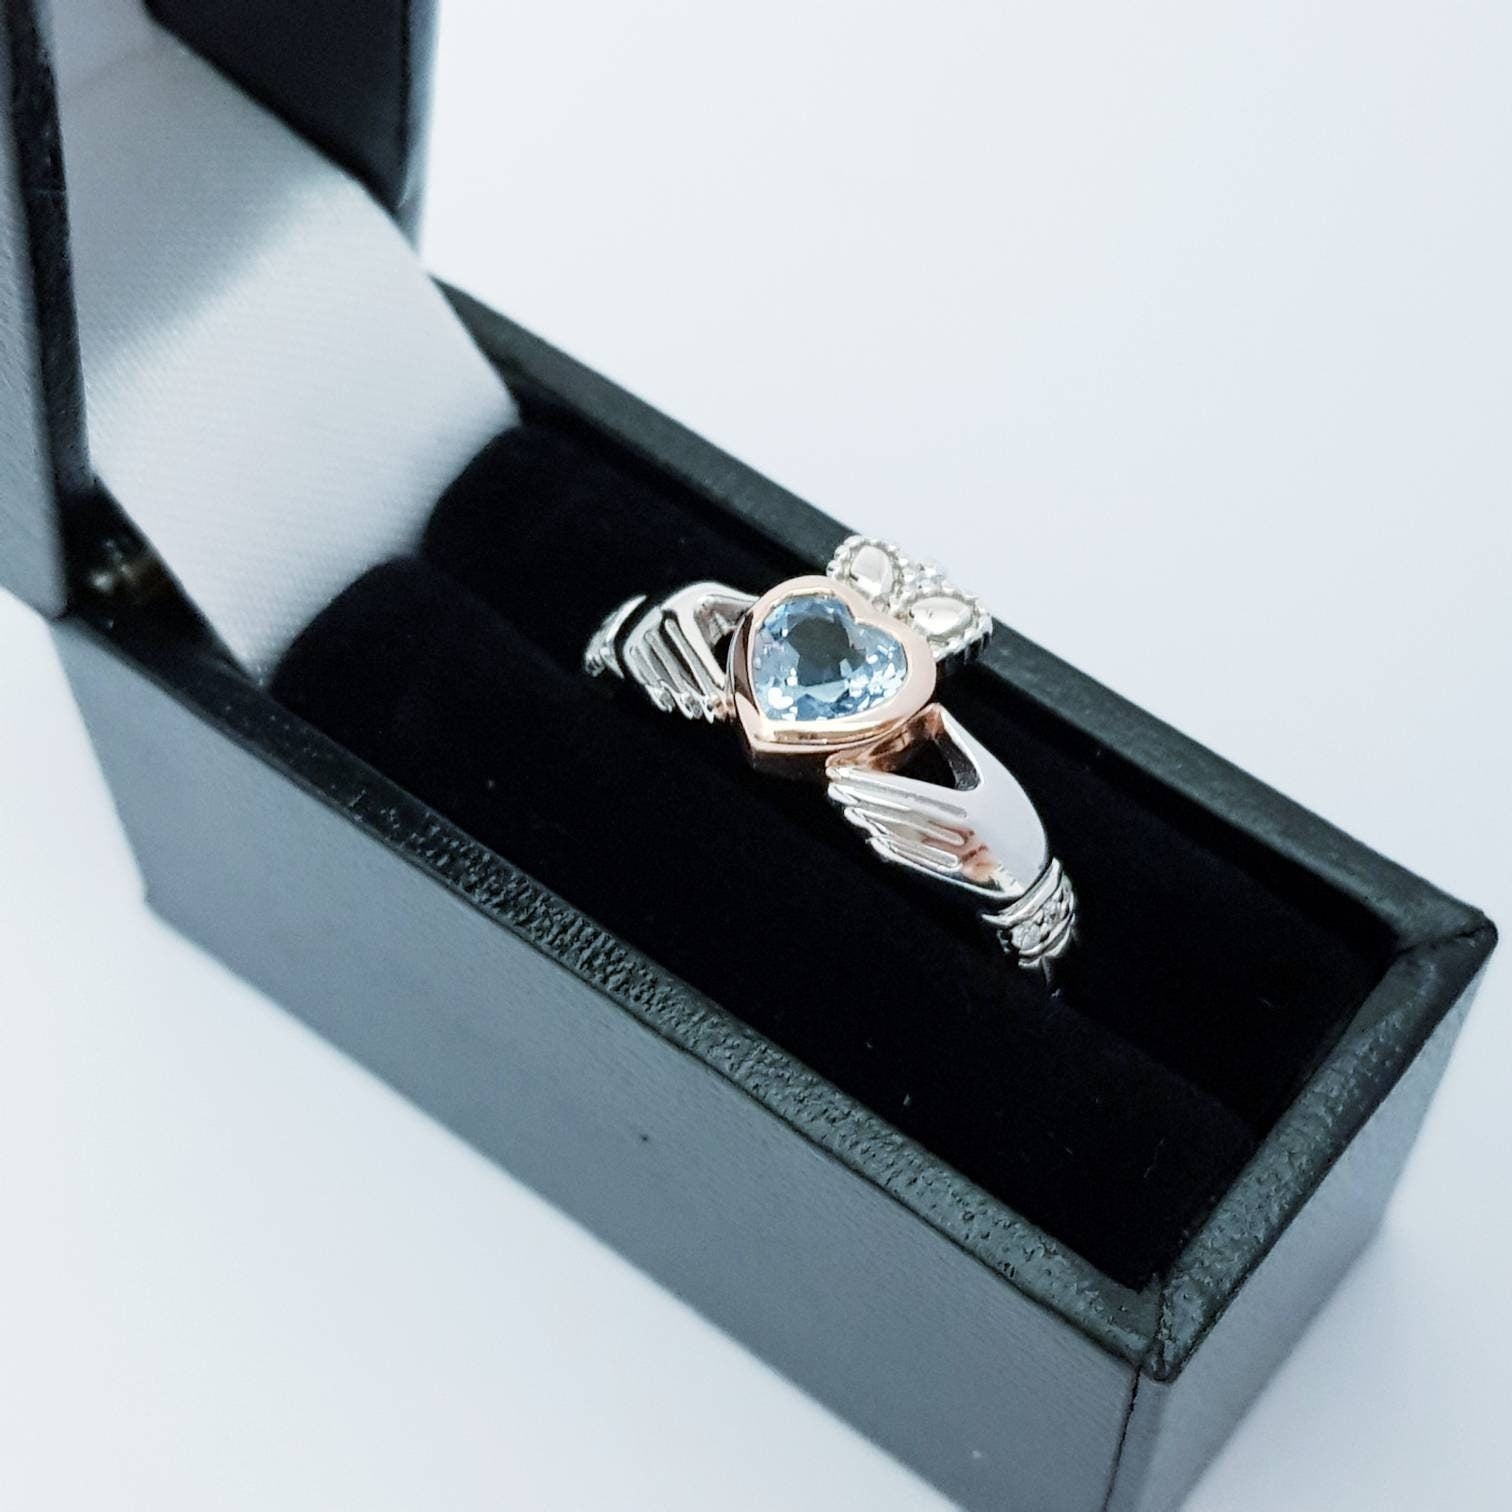 Sterling Silver Rose Gold plated Claddagh ring set with aquamarine stone, unique claddagh ring